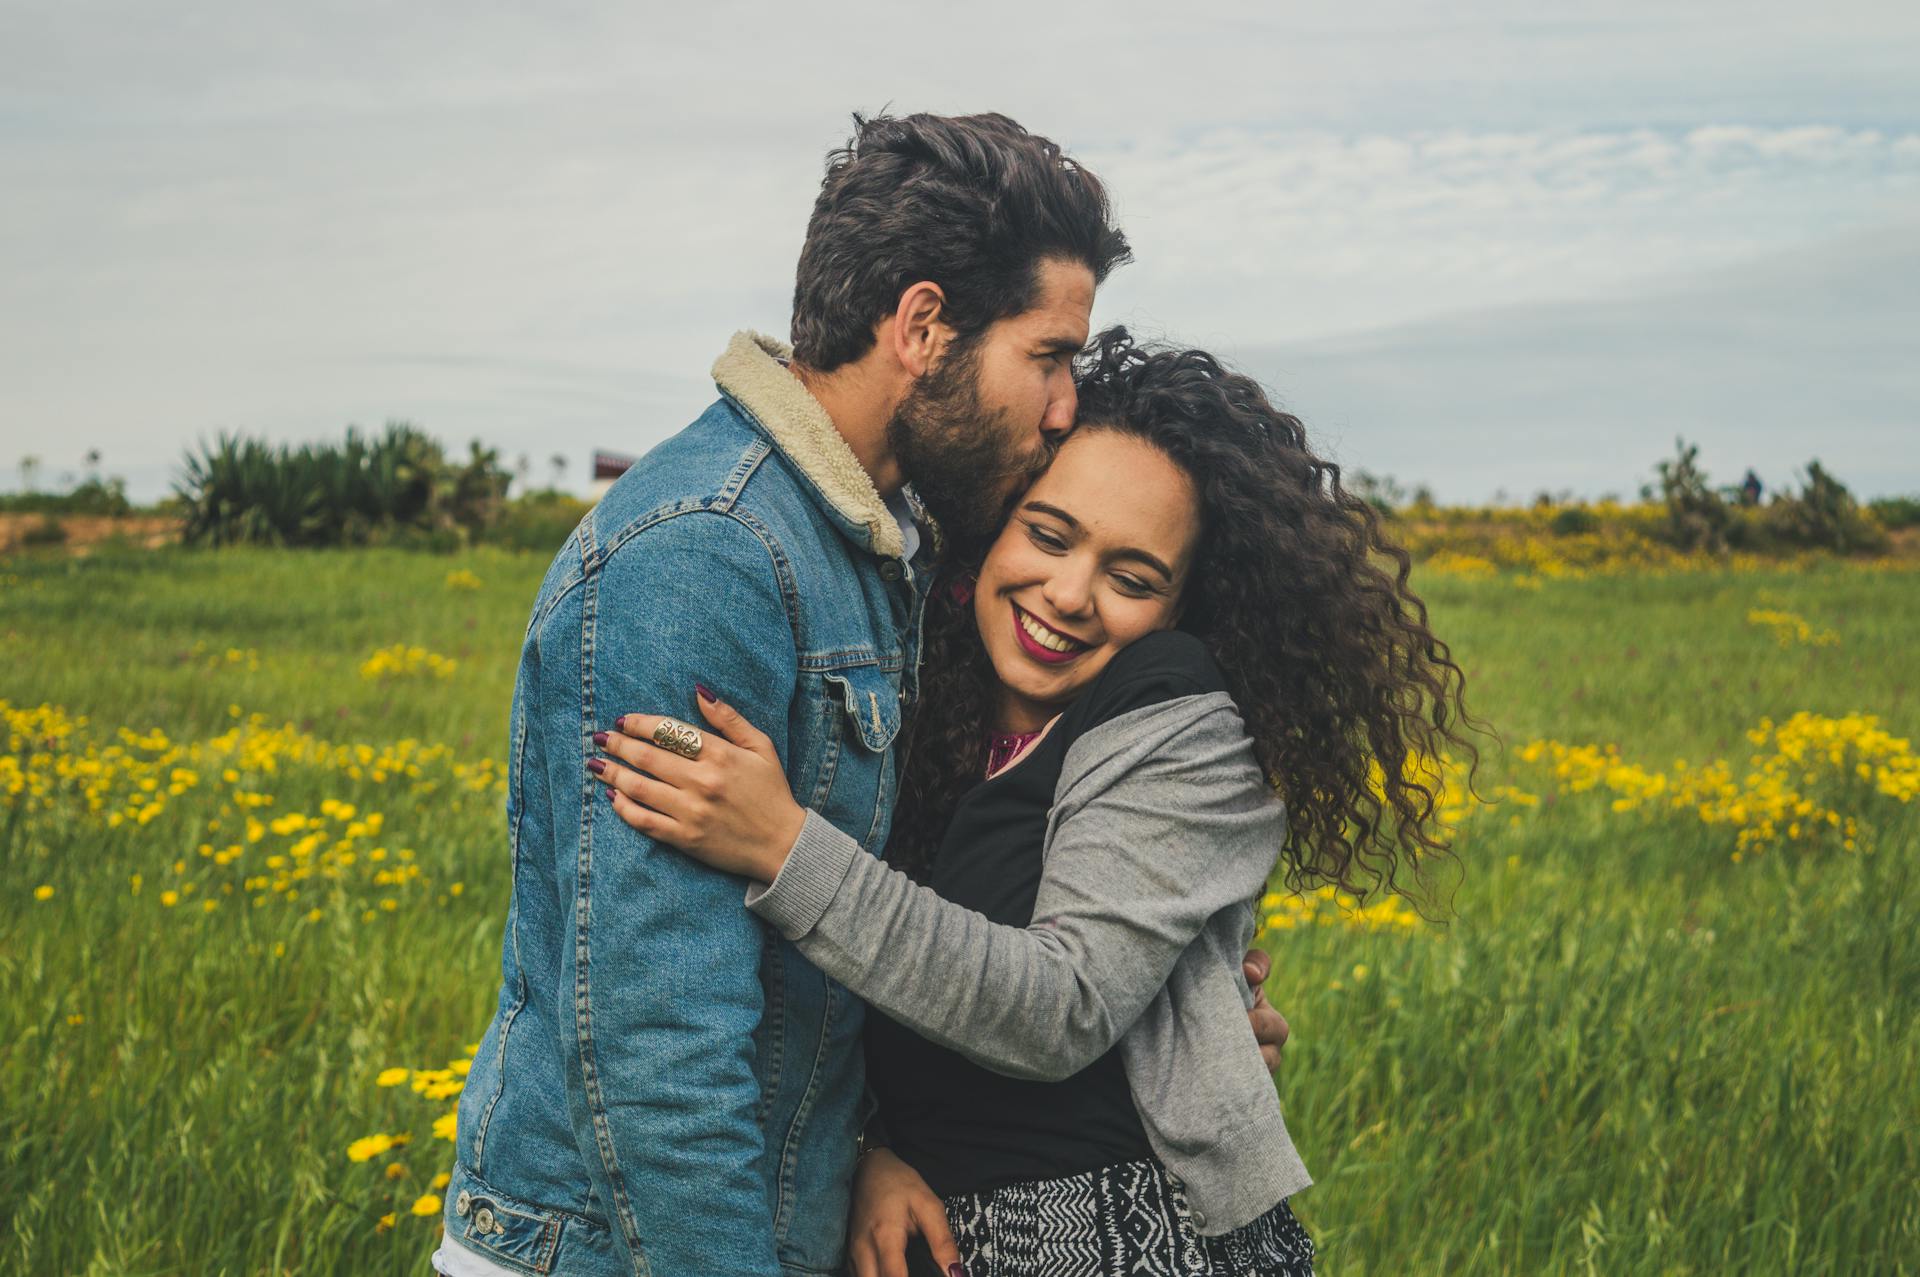 A photo of a young couple | Source: Pexels